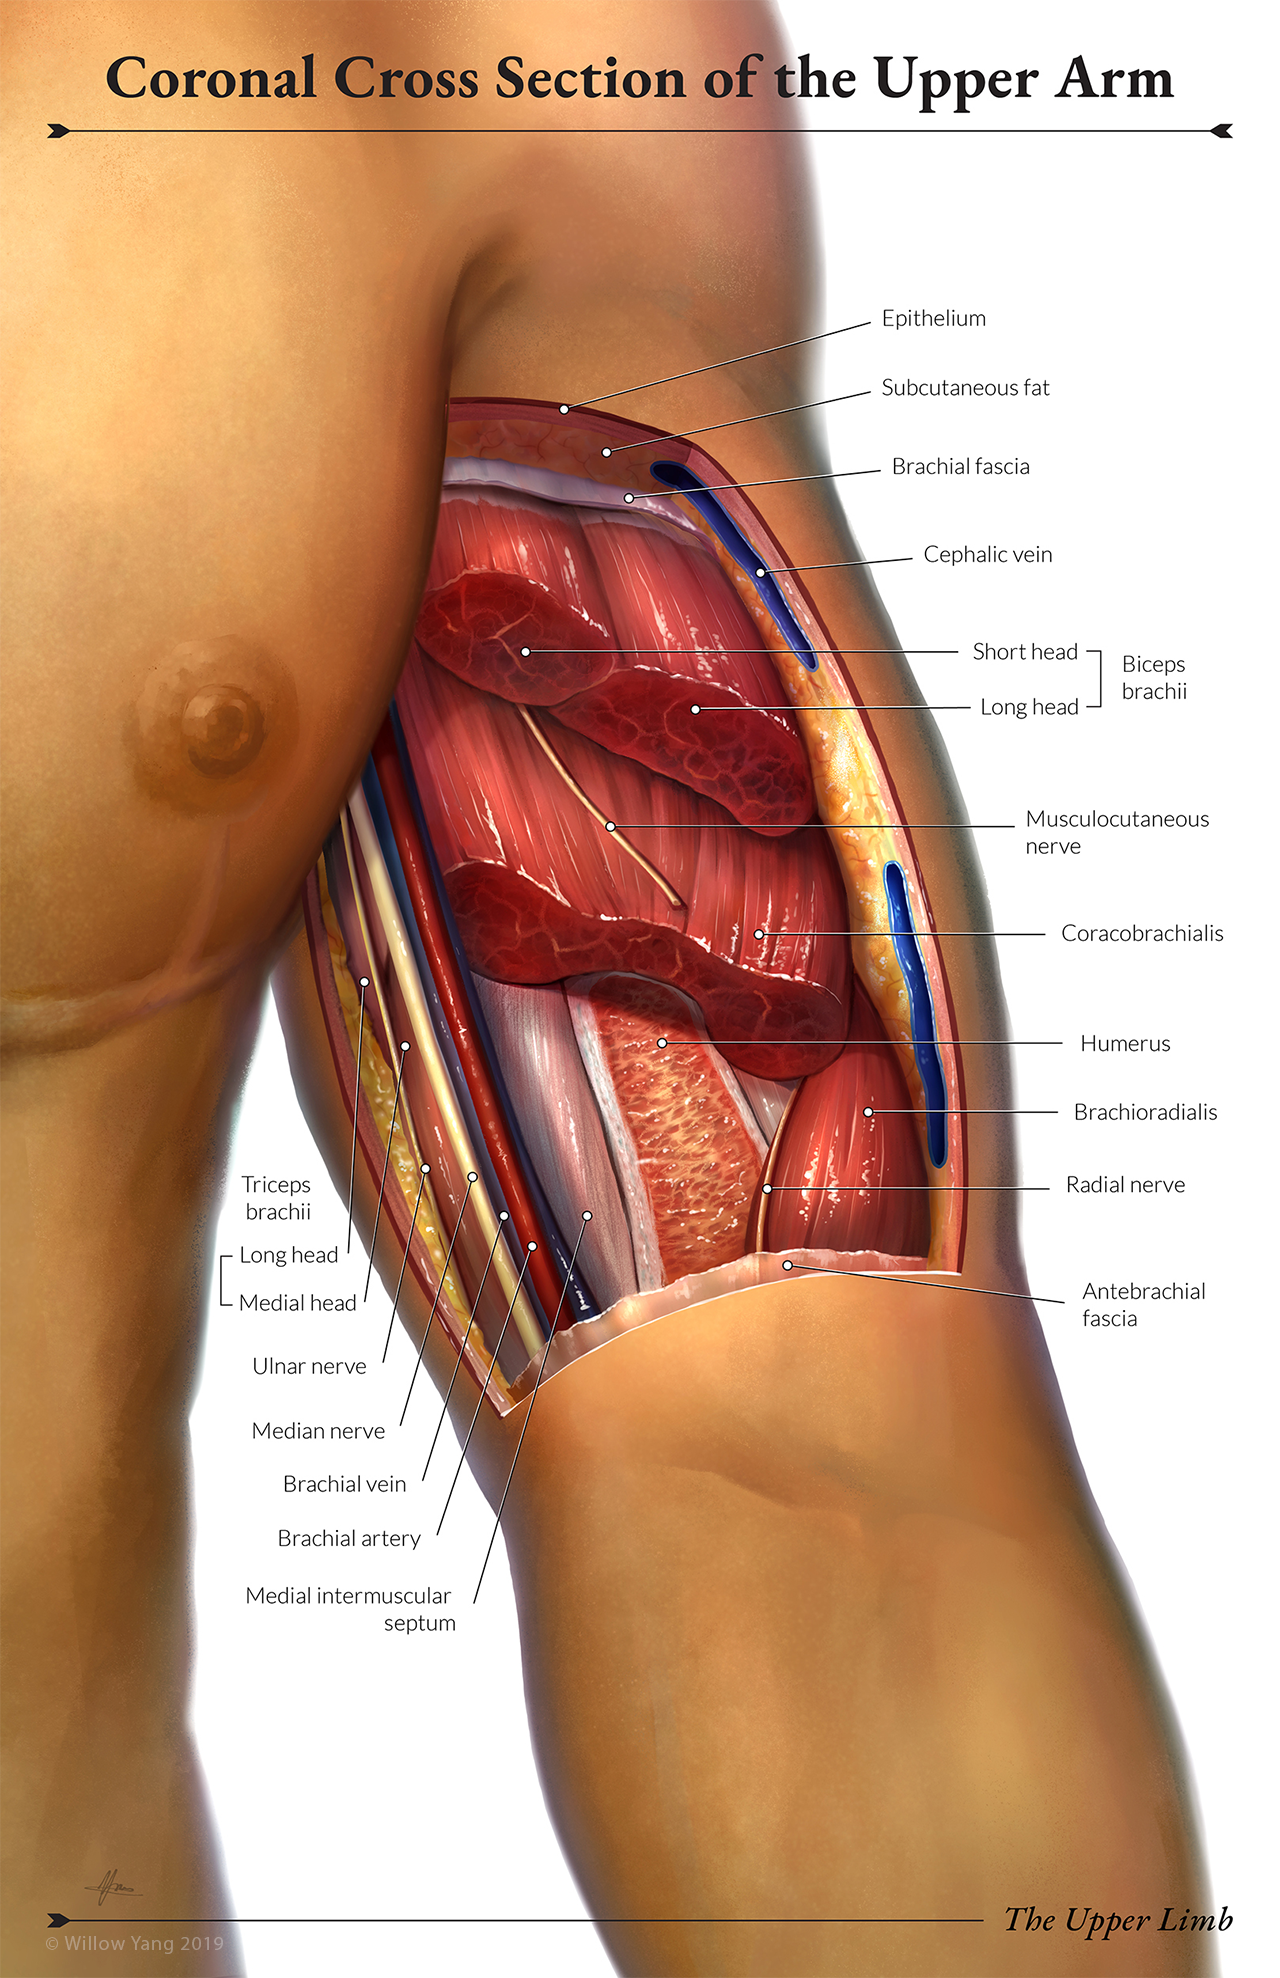 Labeled realistically painted illustration of cross section of upper arm depicting multiple muscles and other anatomical structures